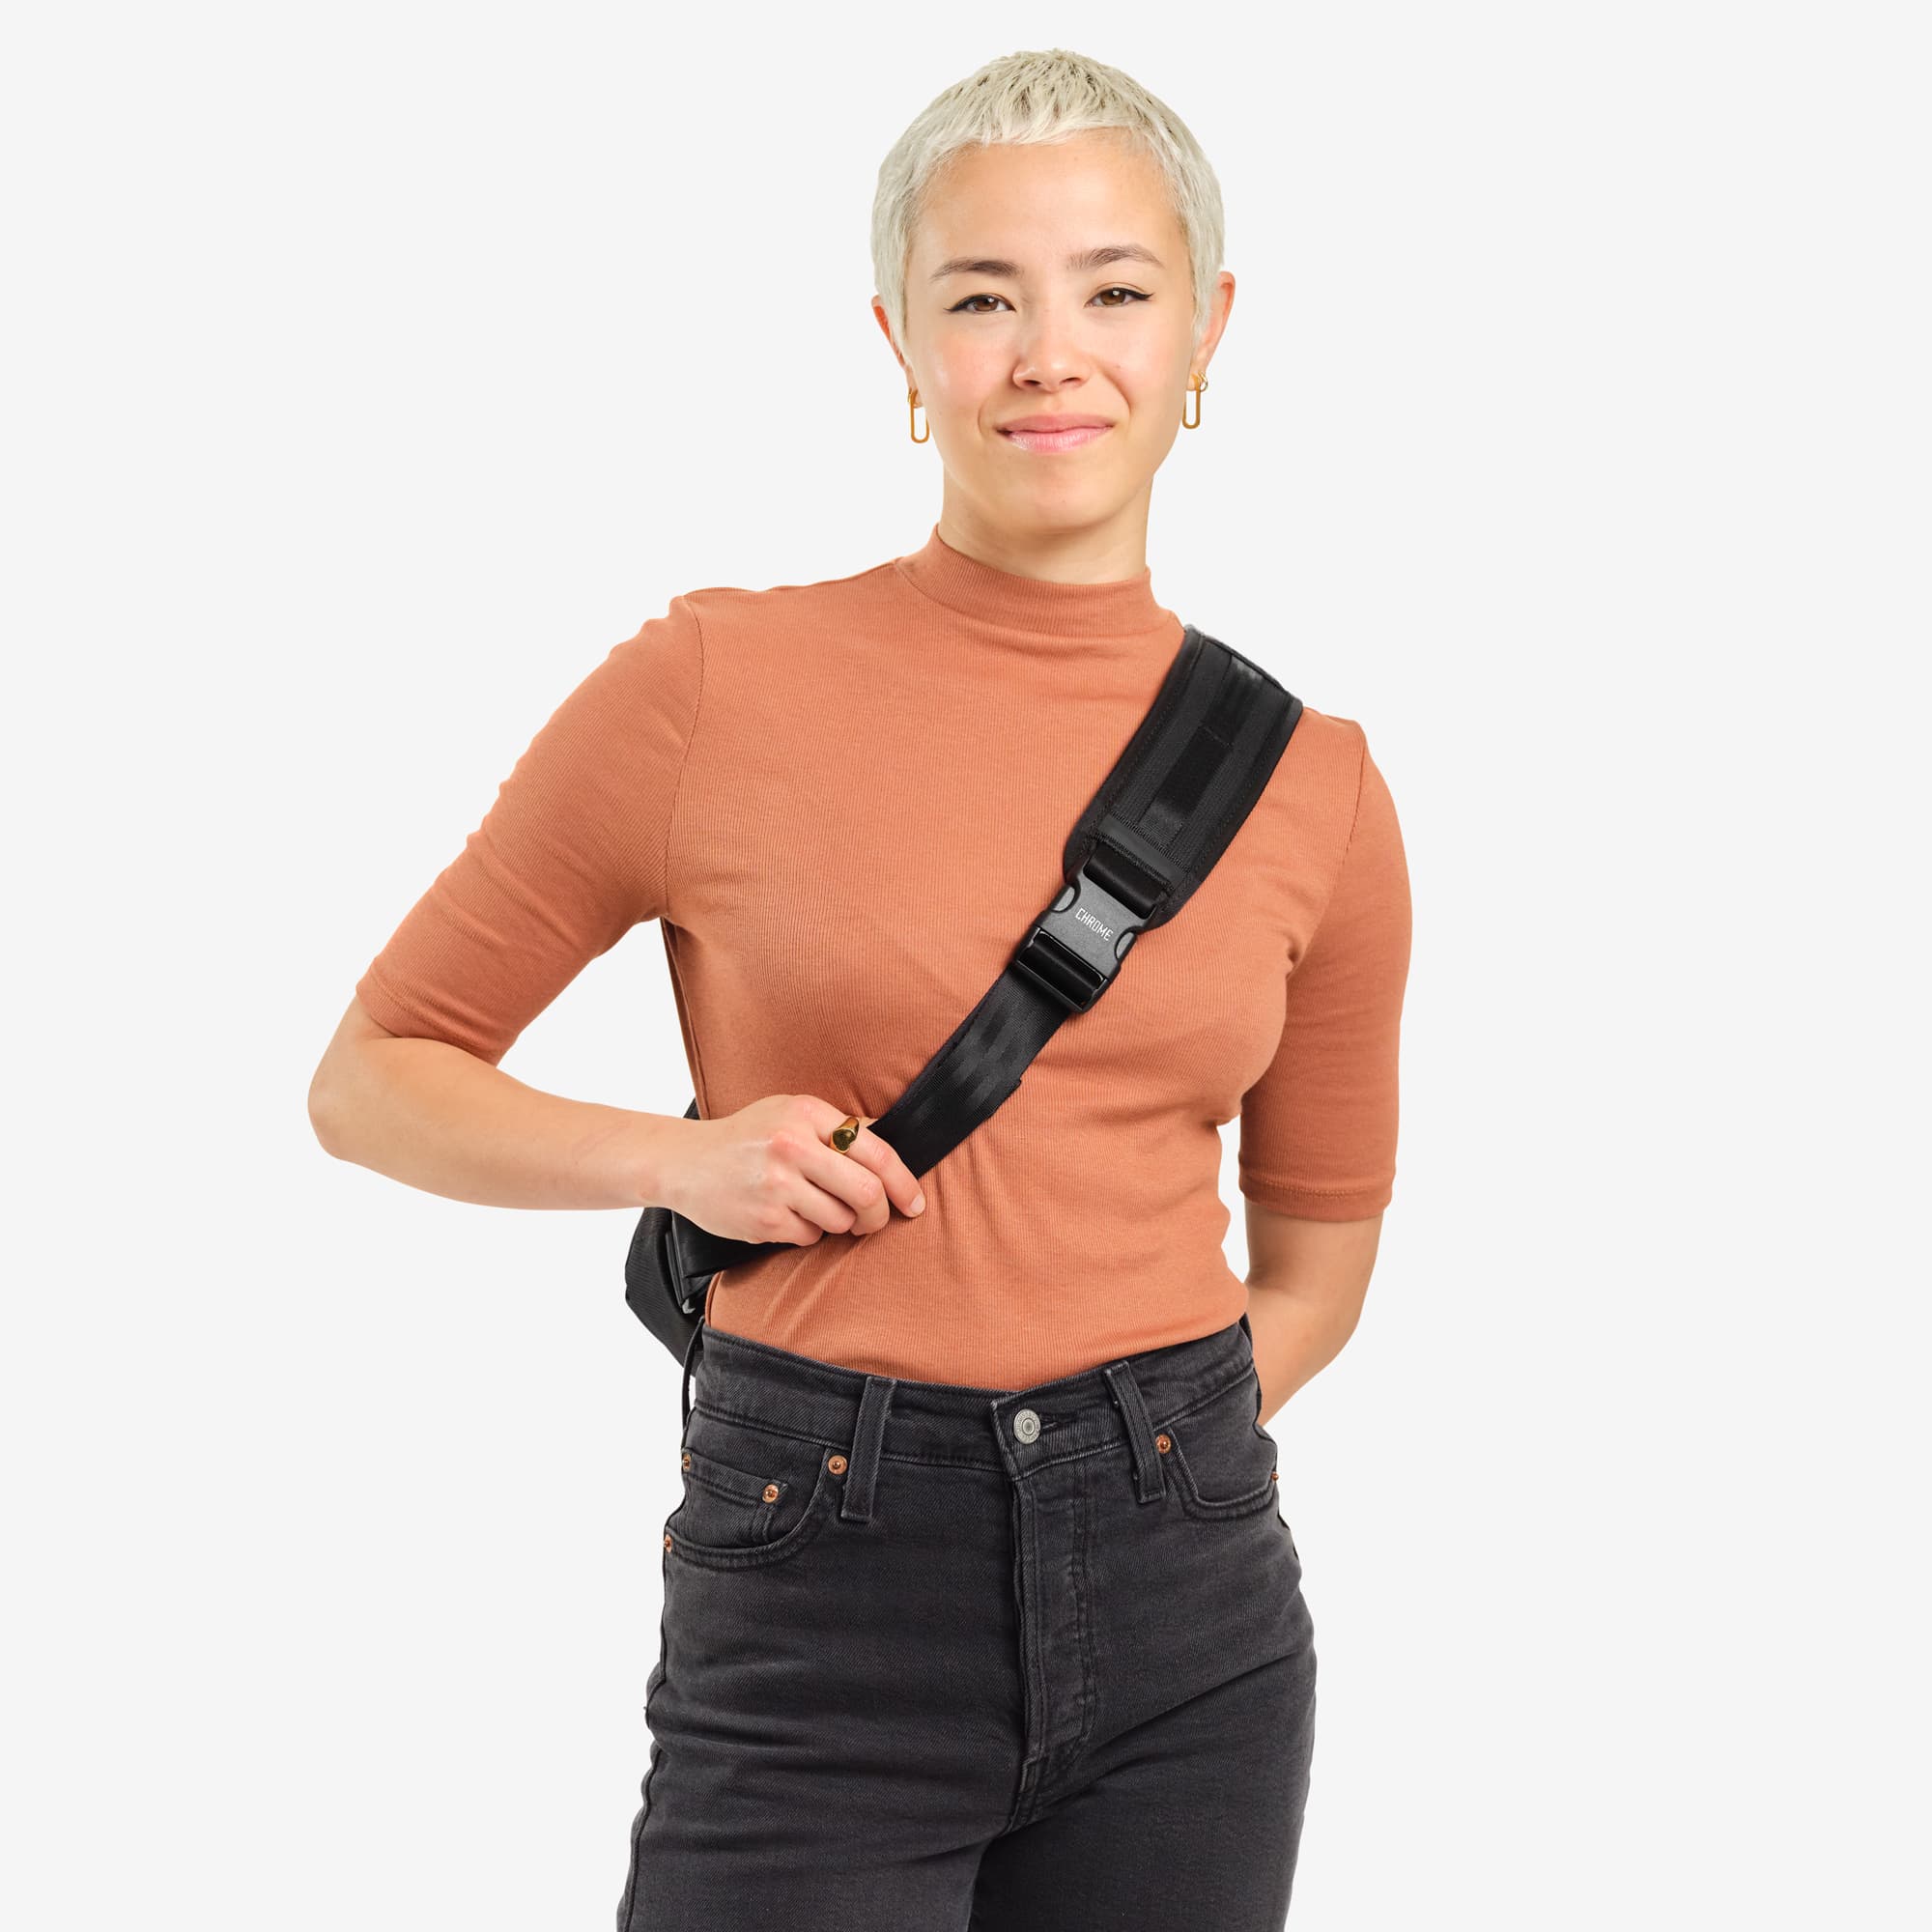 Ruckas Sling in black worn by a woman front view #color_black